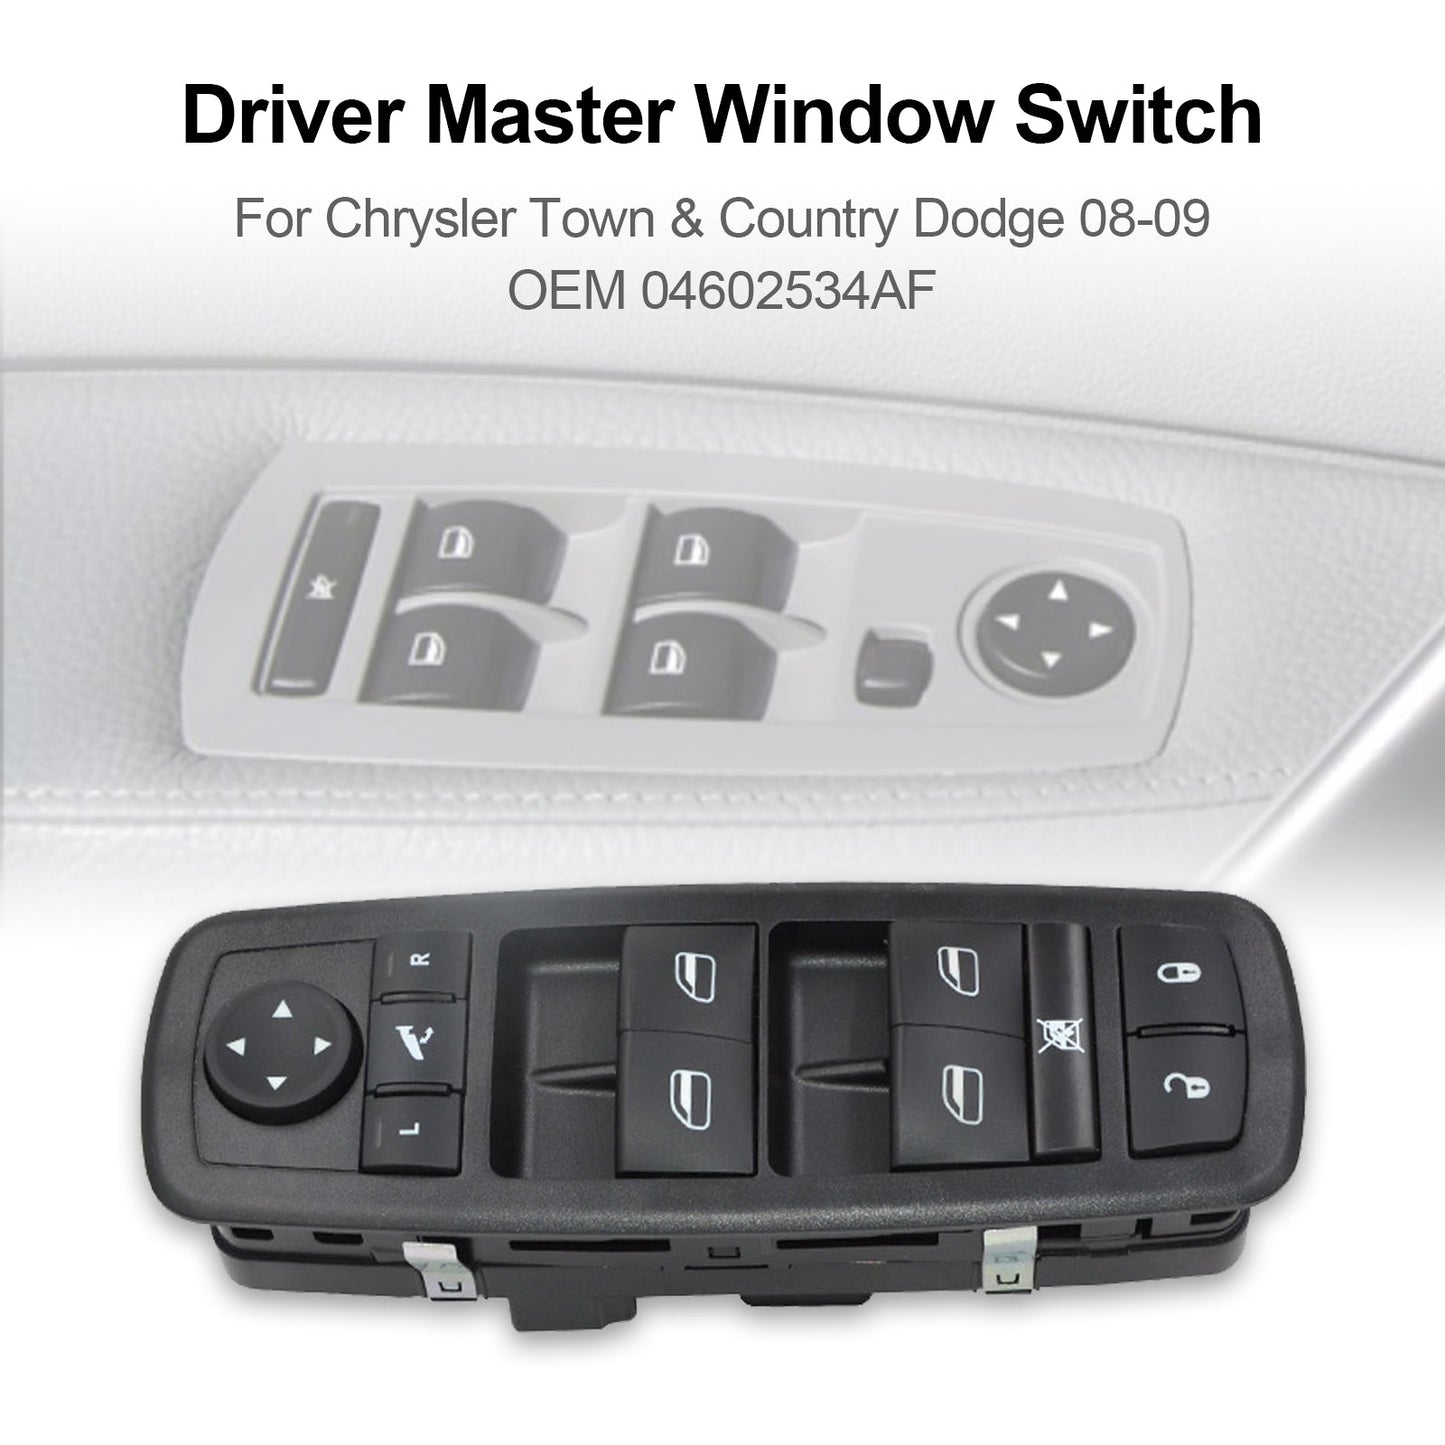 Driver Master Finestra Interruttore Per Chrysler Town &amp; Country Dodge 08-09 04602534AF Generico